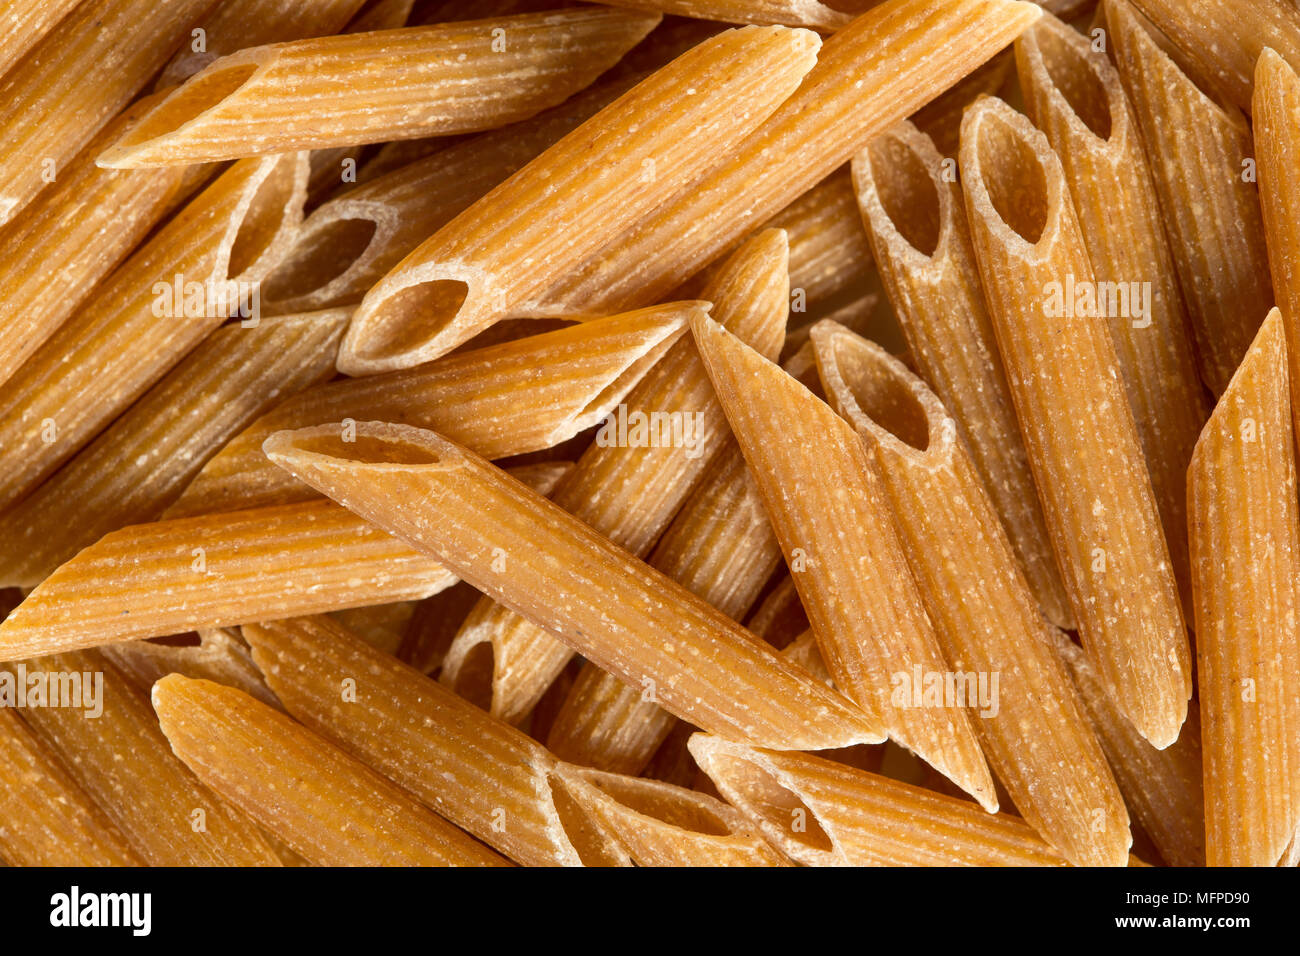 Close up of uncooked whole wheat penne pasta. Food background image. Stock Photo